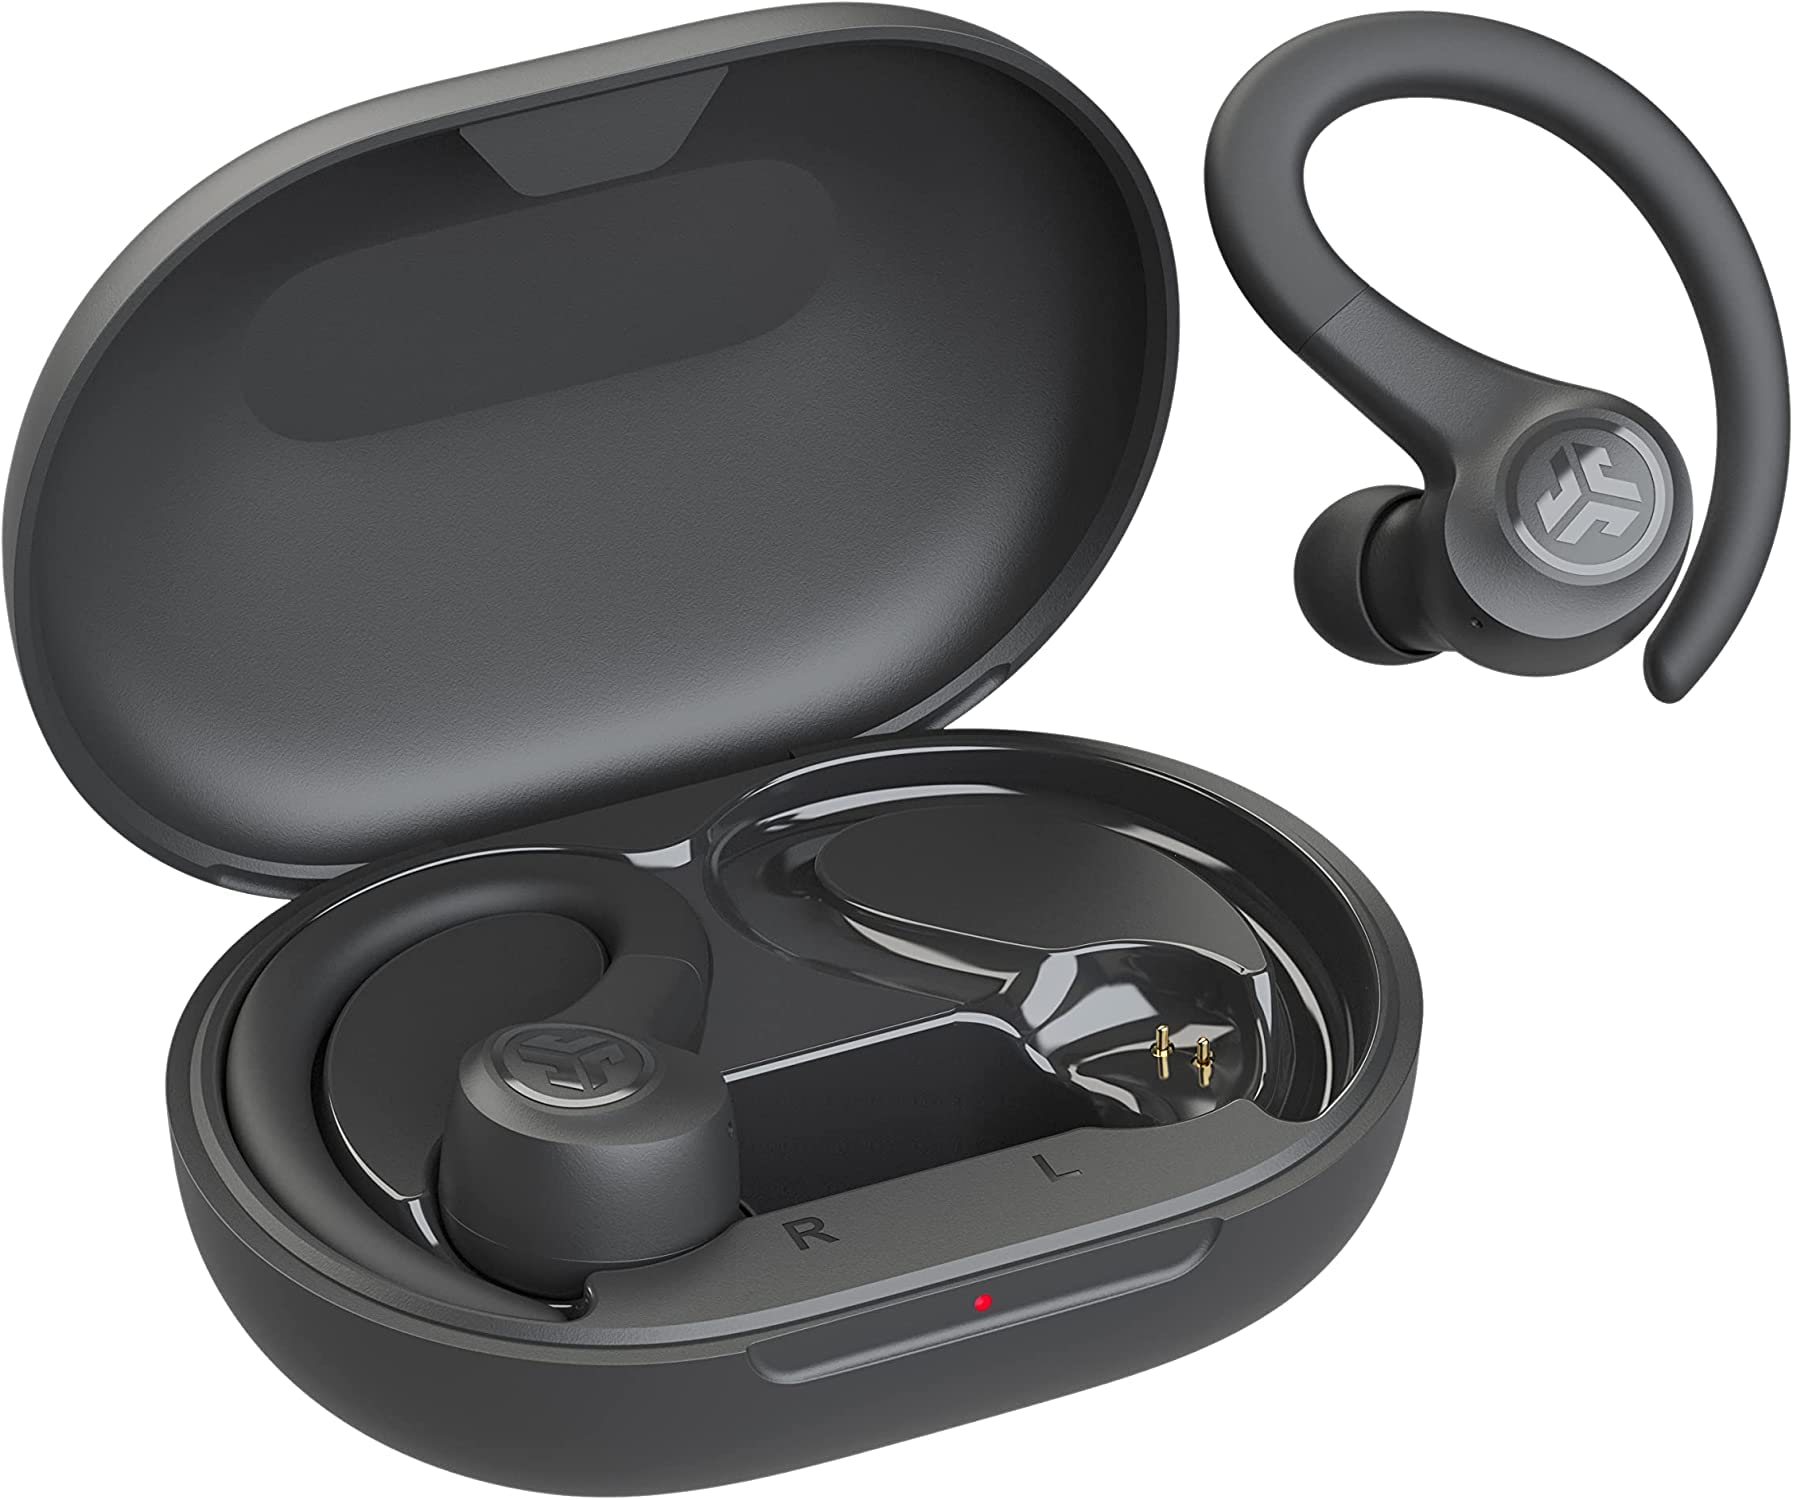 JLAB Go Air Sport - Wireless Workout Earbuds Featuring C3 Clear Calling, Secure Earhook Sport Design, 32+ Hour Bluetooth Playtime, and 3 EQ Sound Settings (Graphite/Black)